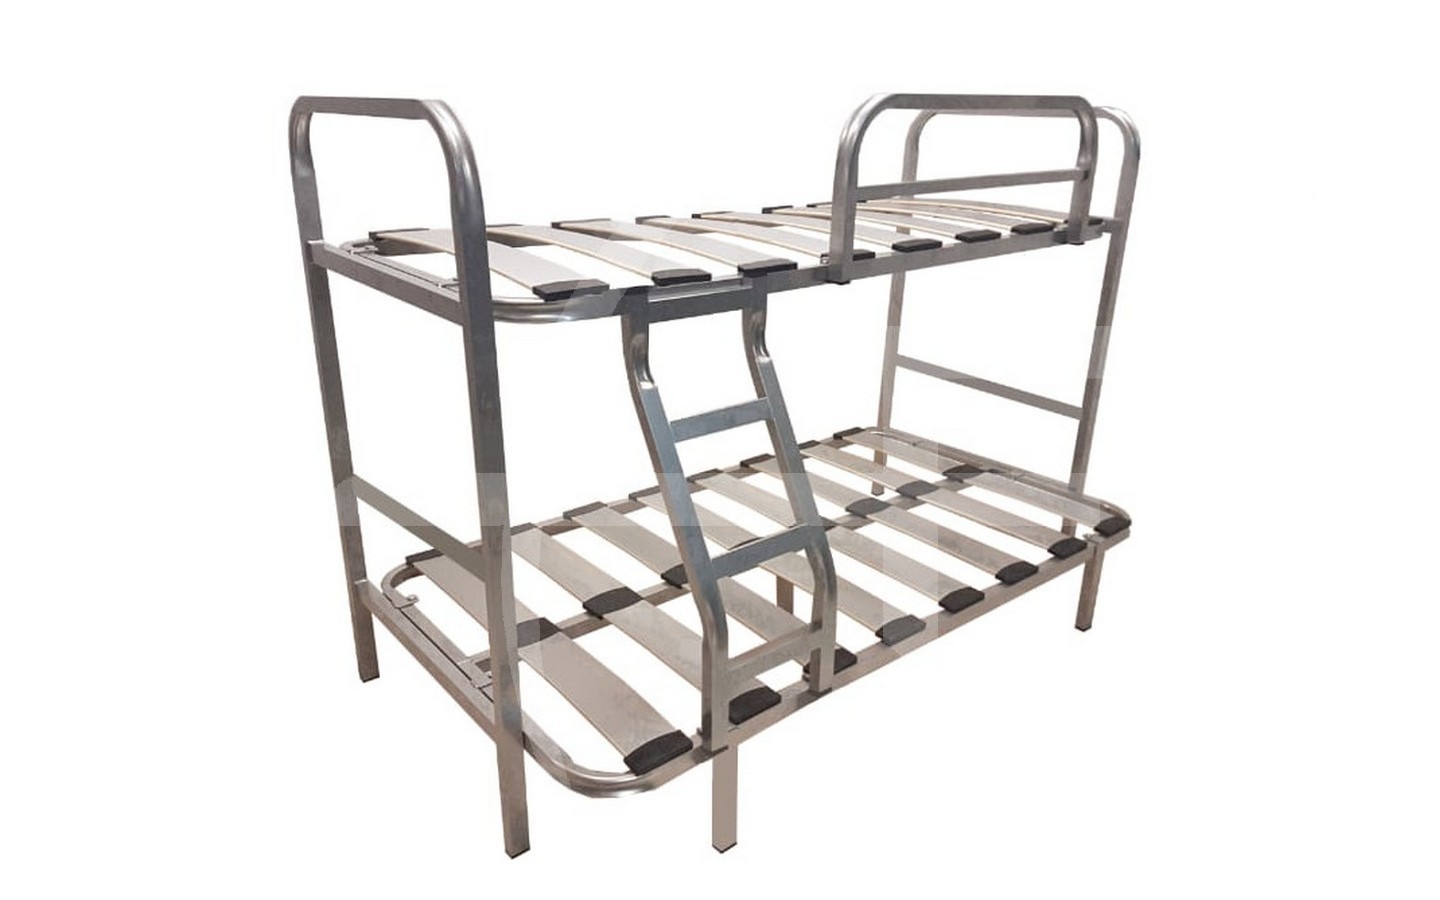 Steel Bunk Beds Military, Metal Frame Bunk Beds With Mattresses